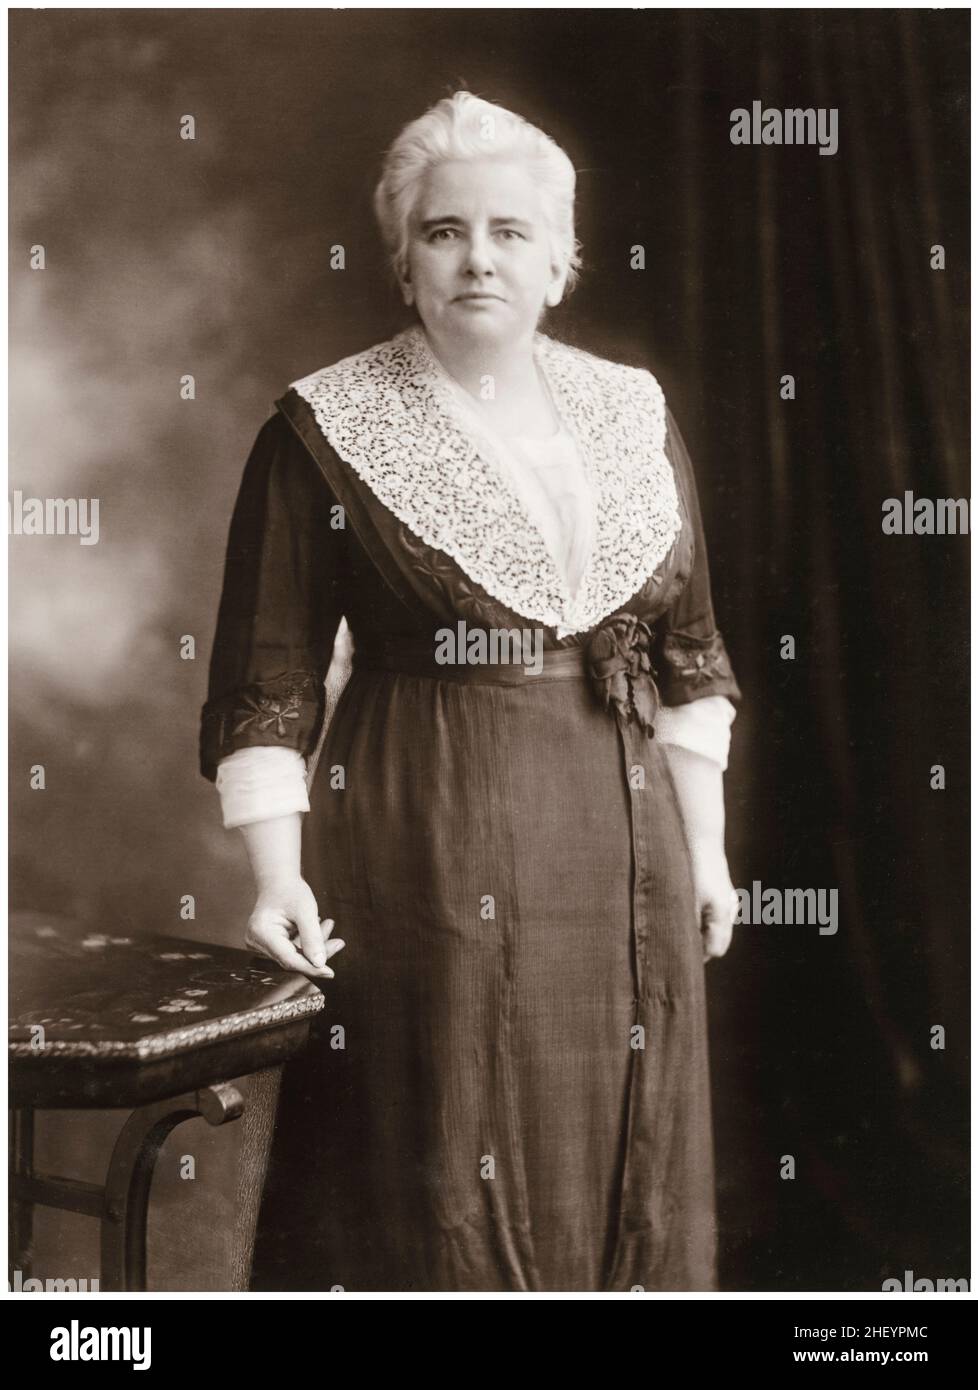 Anna Howard Shaw (1849-1919), American leader of the Women's Suffrage movement and ordained Methodist Minister, portrait photograph circa 1915 Stock Photo